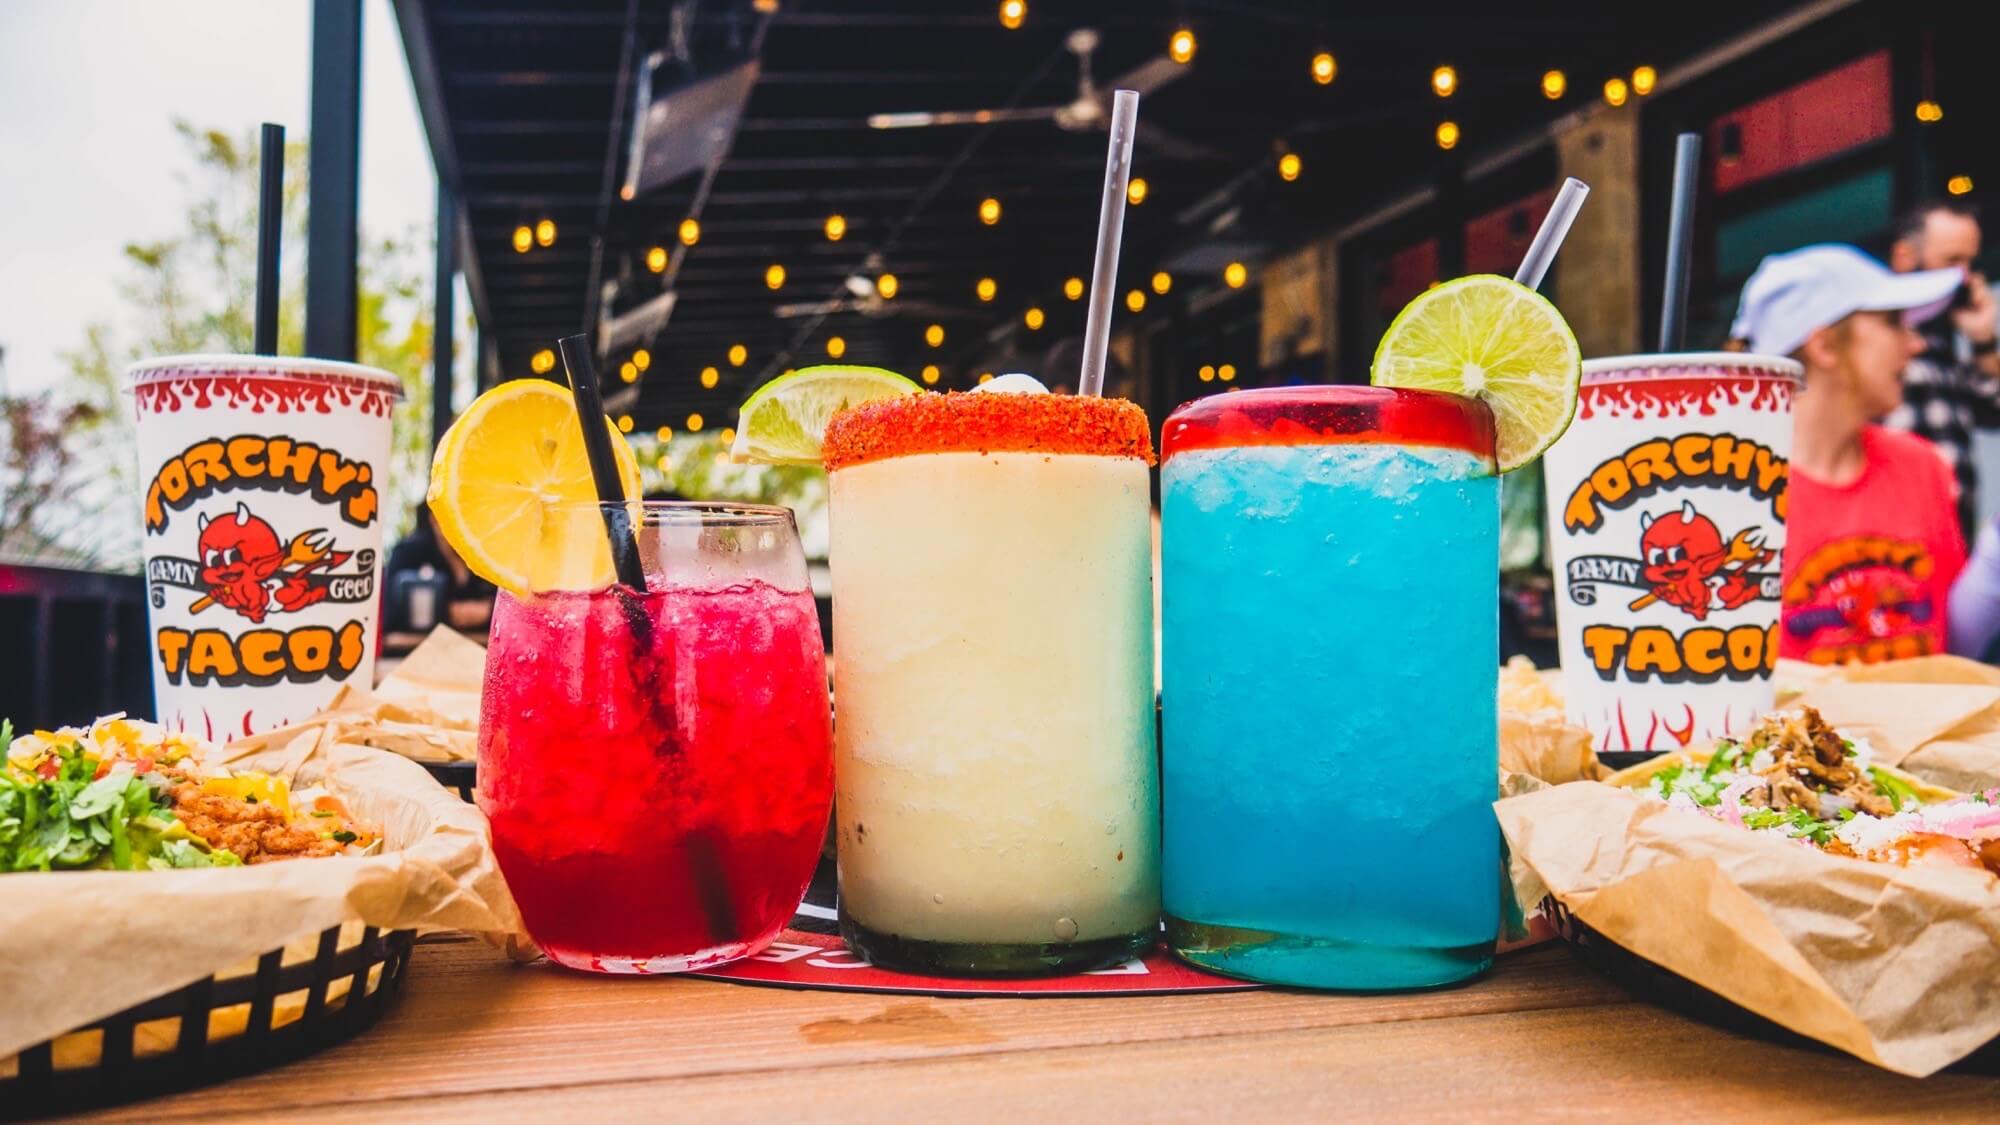 Torchy's Tacos Bar and Drinks